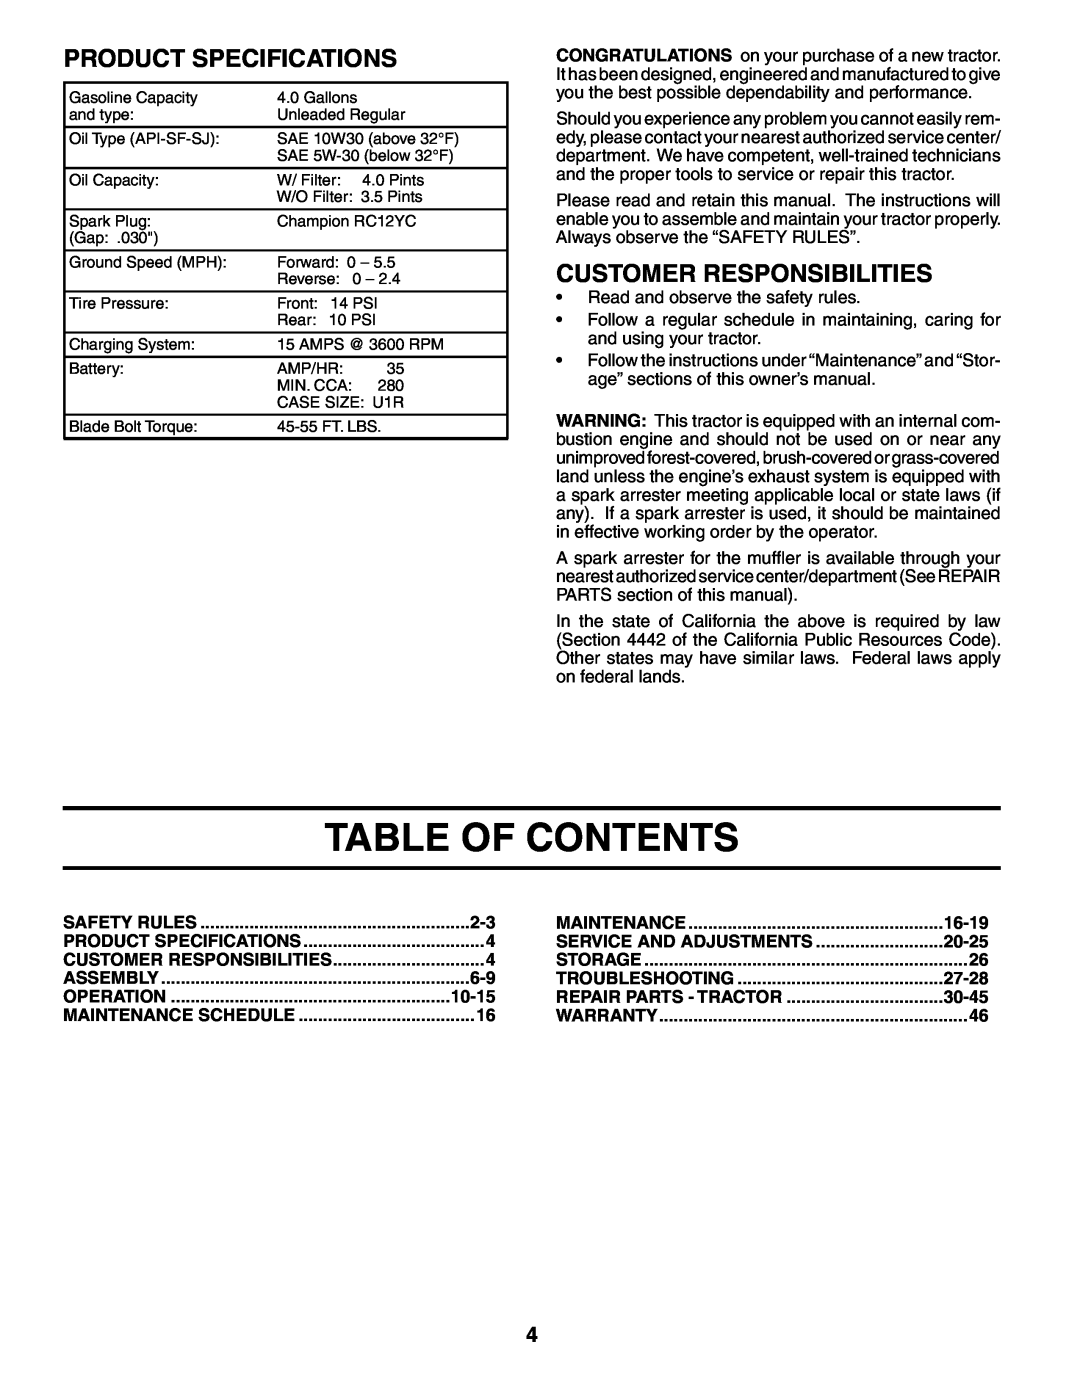 Poulan 954569516, 185498 owner manual Table Of Contents, Product Specifications, Customer Responsibilities 